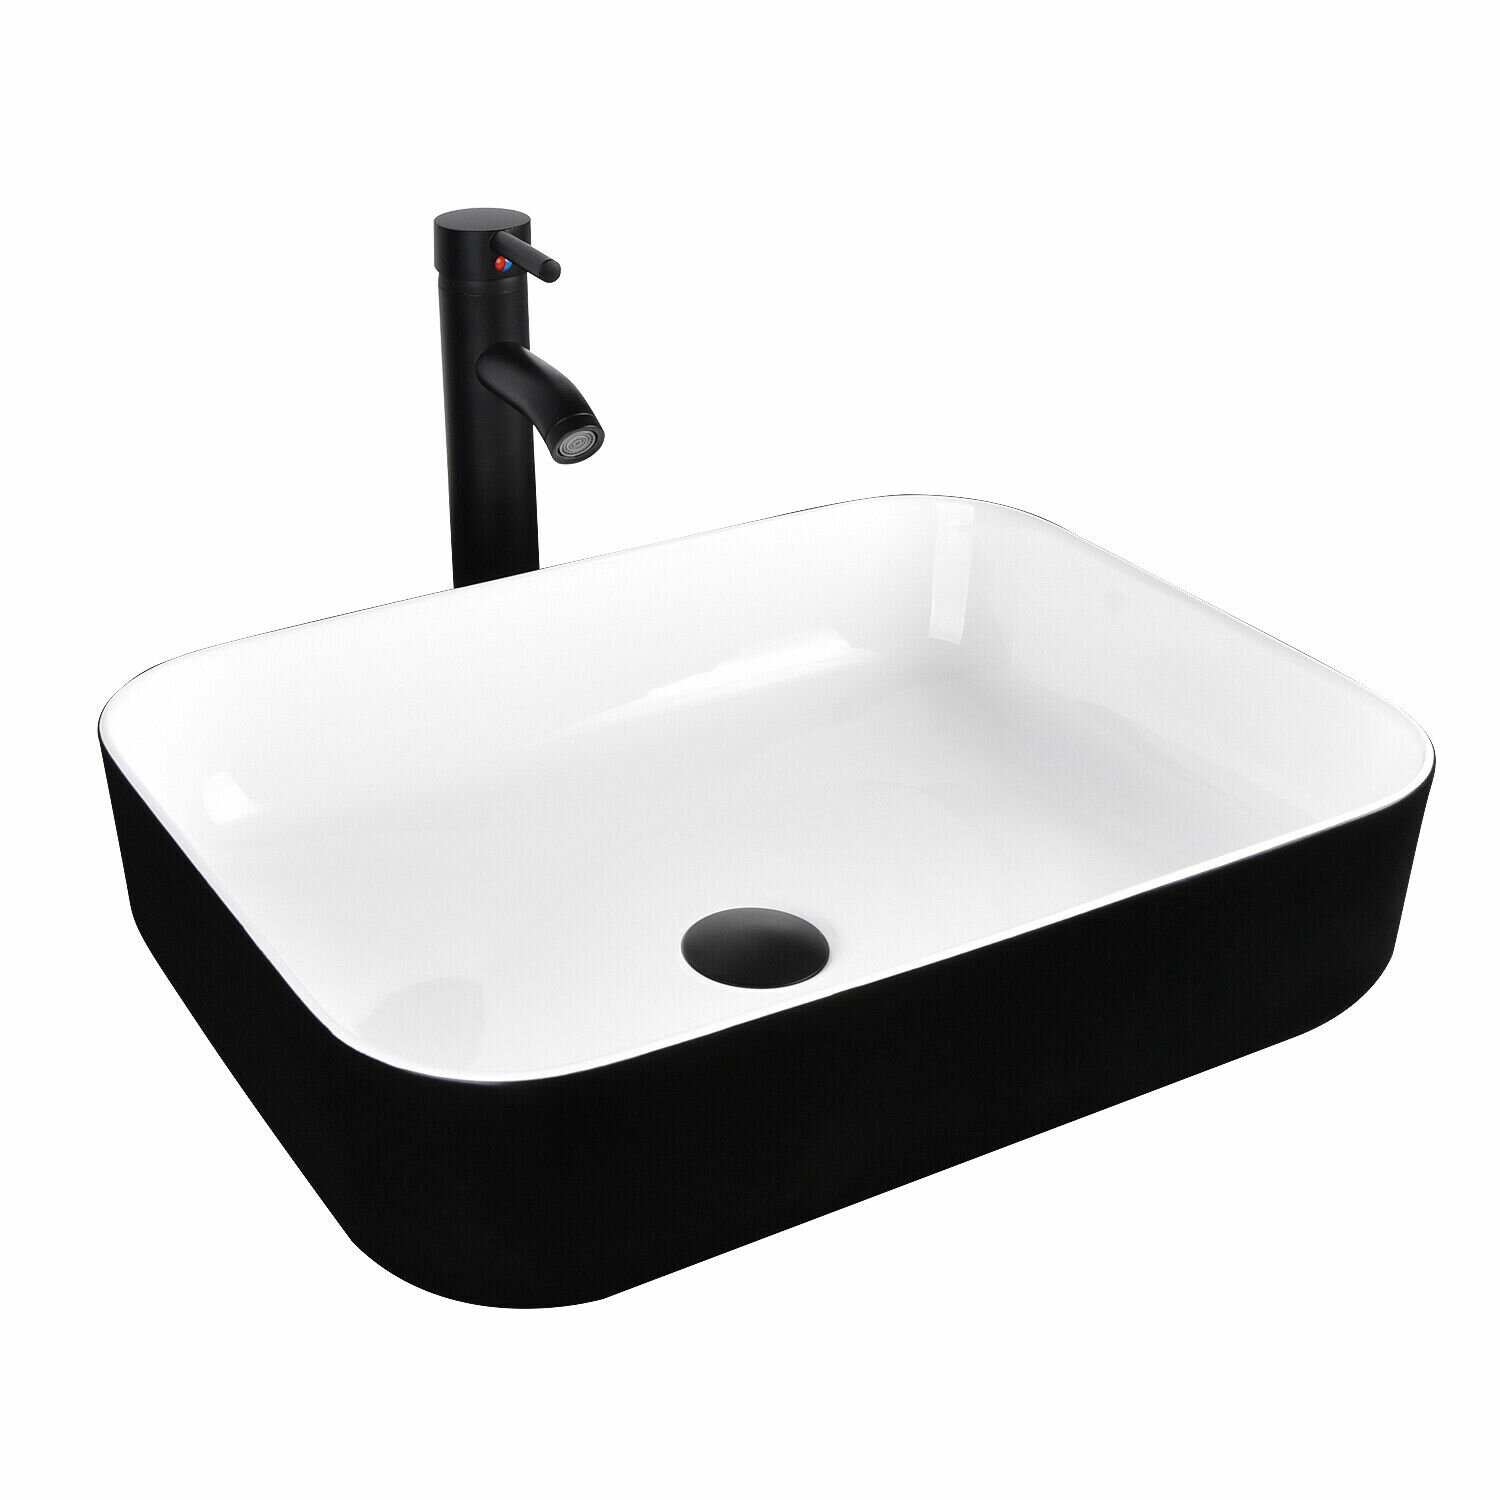 Rays White Ceramic Square Vessel Bathroom Sink With Faucet Reviews Wayfairca